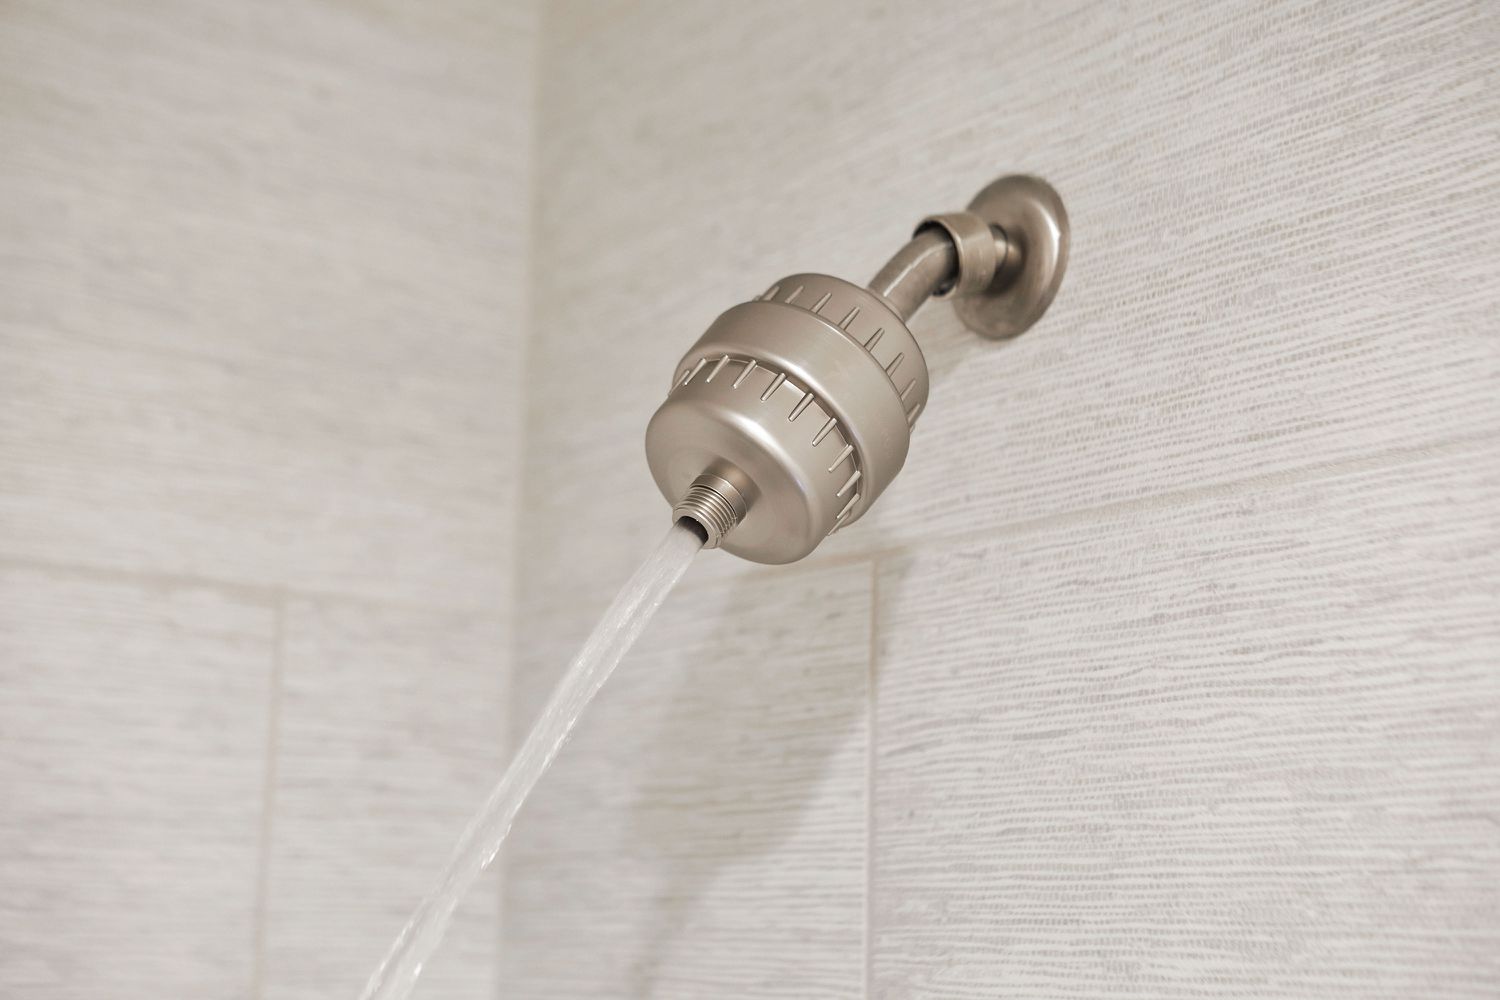 Water flushed through in-line shower filter to remove sediment